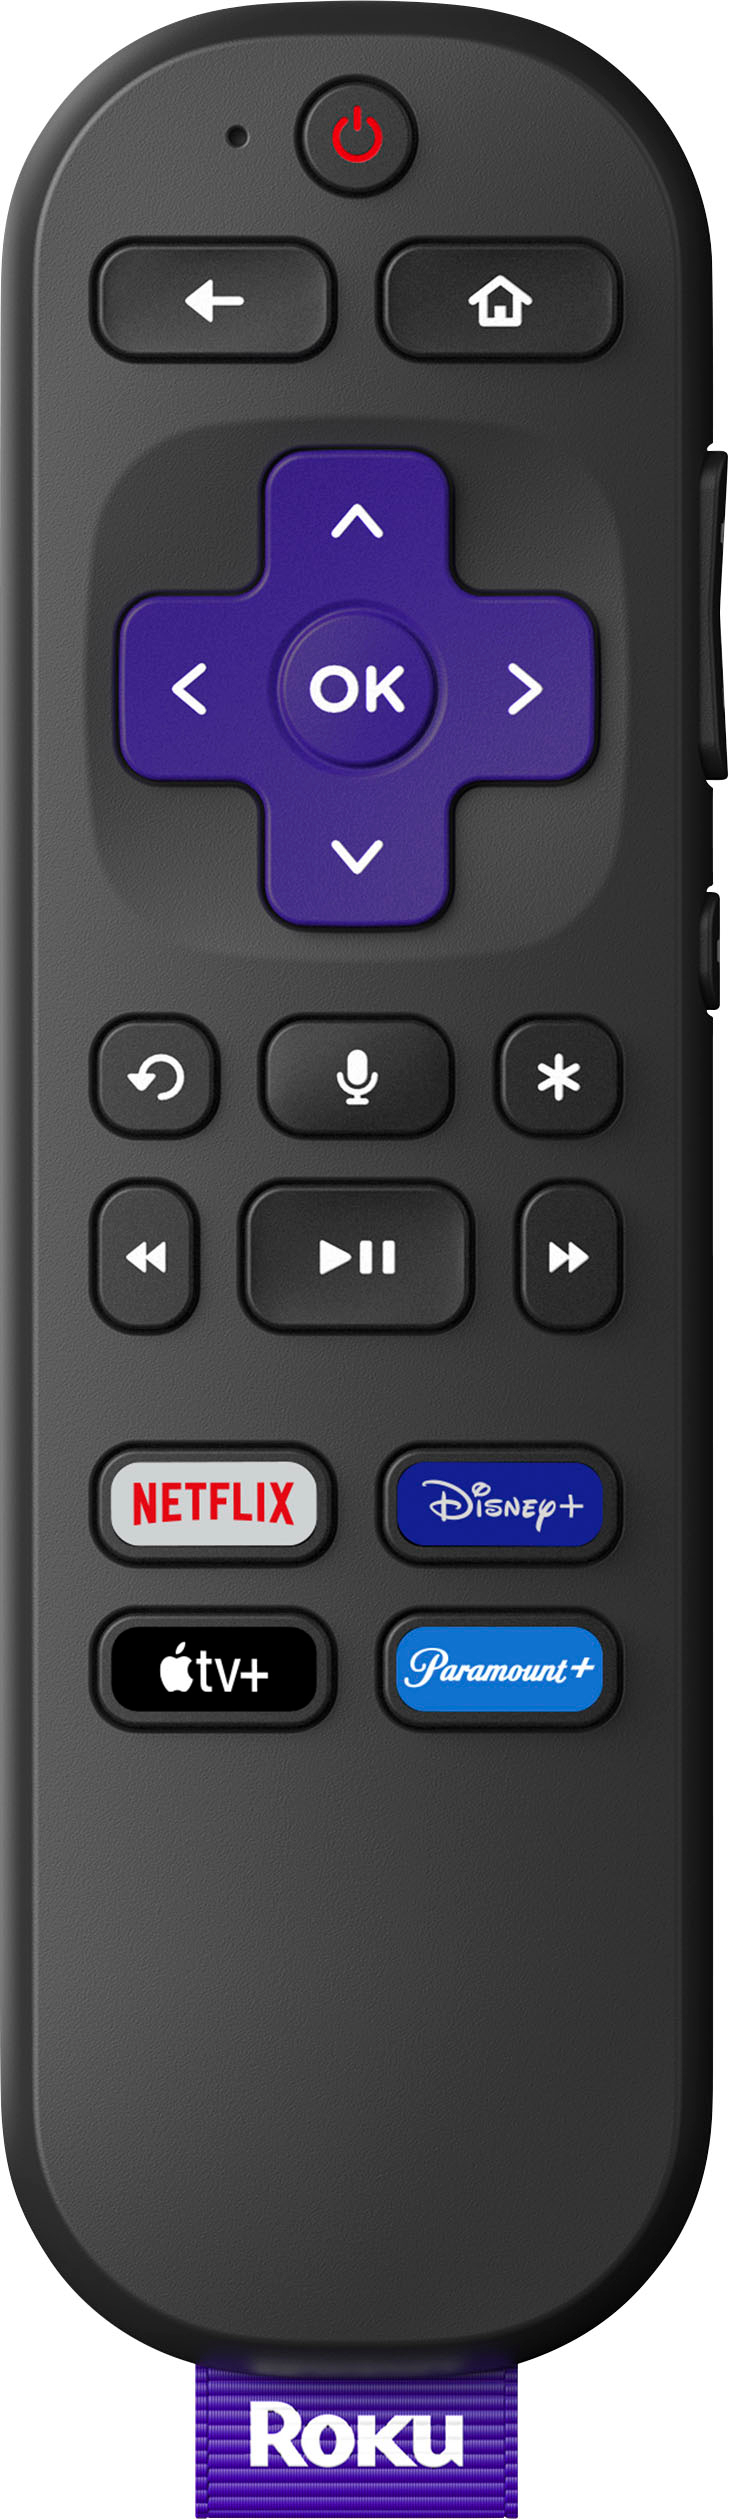 Roku Streaming Stick 4K 2021 Streaming Device 4K/HDR/Dolby Vision with Roku Voice Remote and TV Controls 